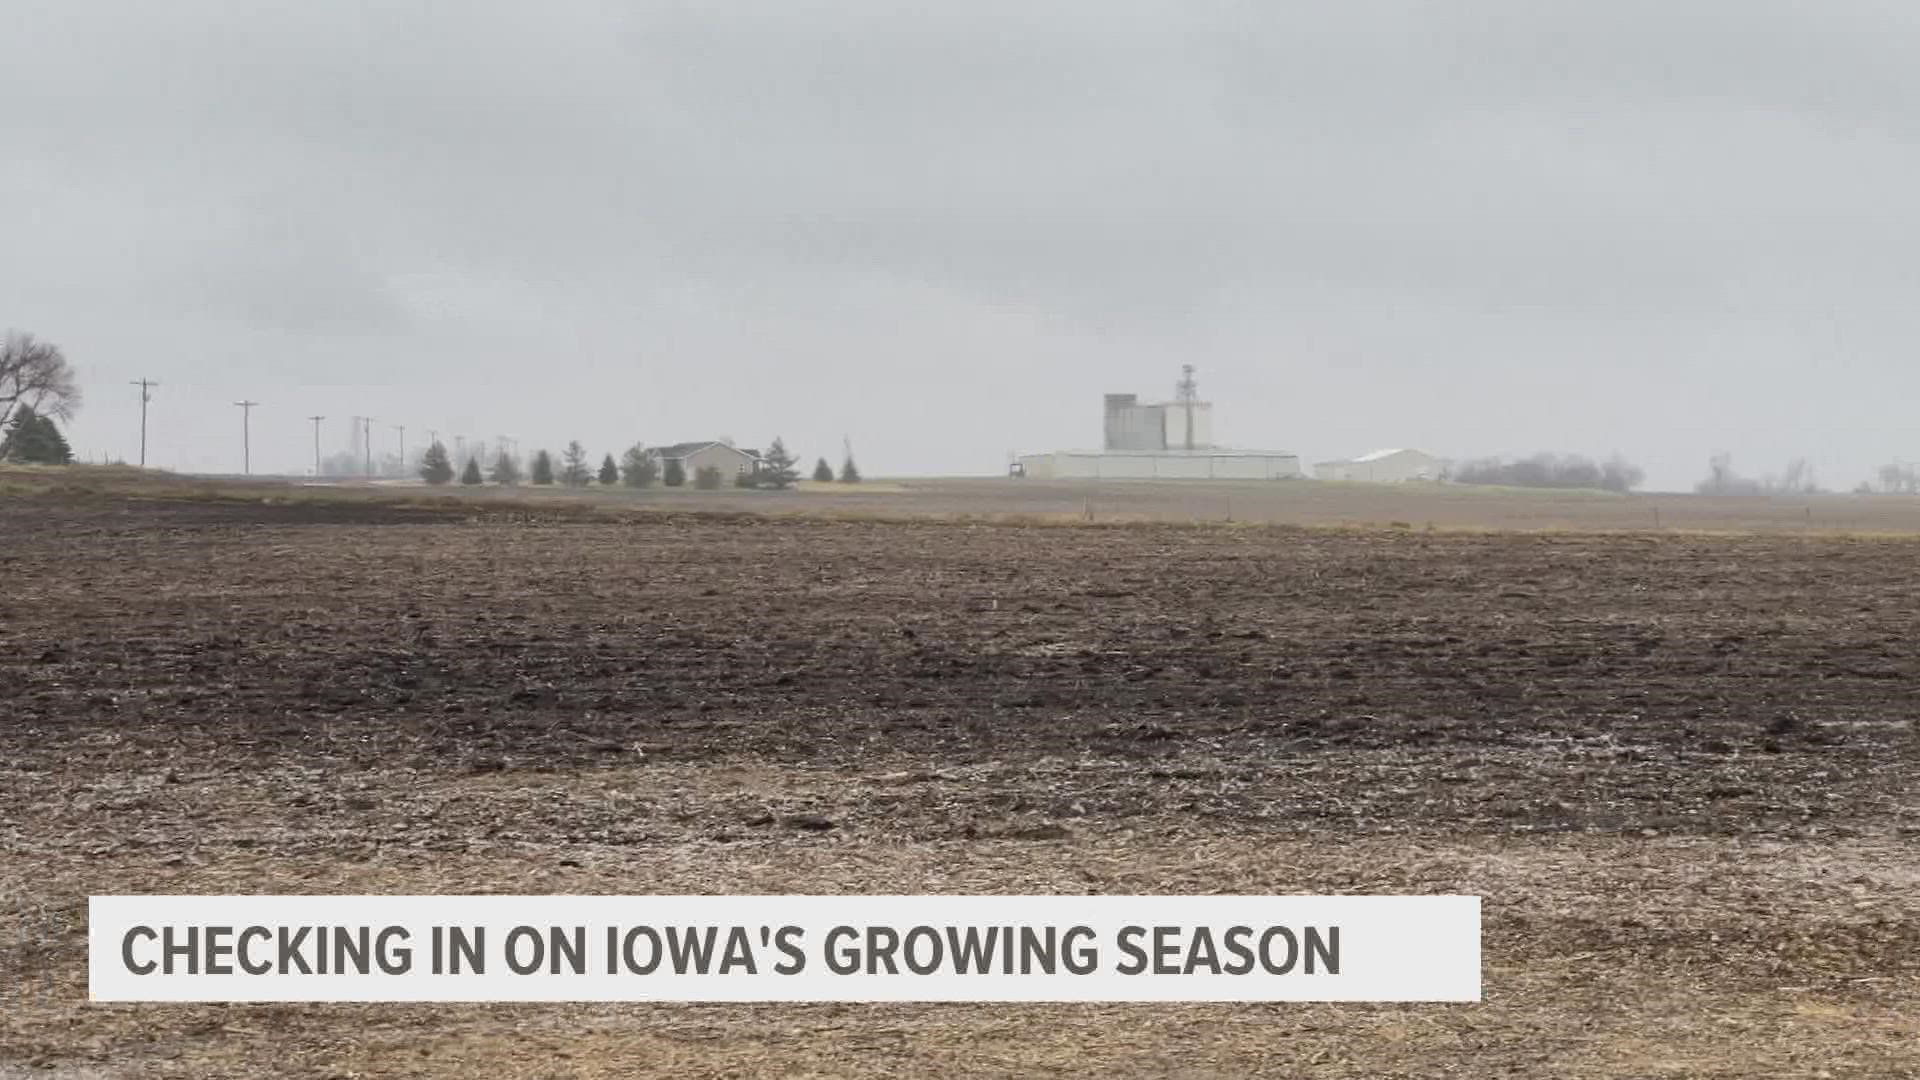 "We've got a great window to plant in getting into early part of May," said Iowa State Climatologist Dr. Justin Glisan. "So not too concerned right now."